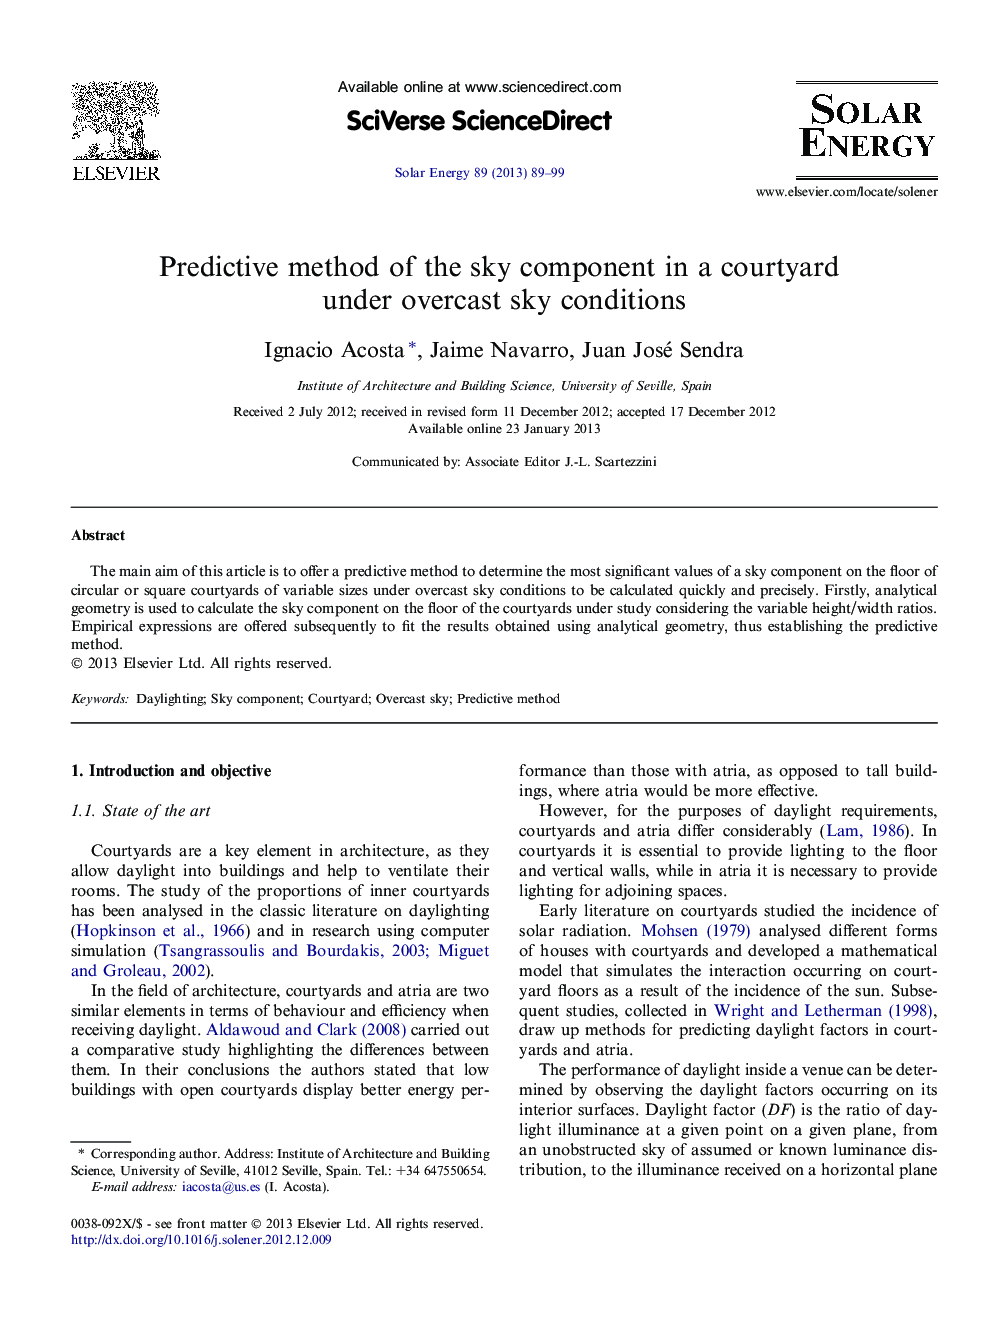 Predictive method of the sky component in a courtyard under overcast sky conditions